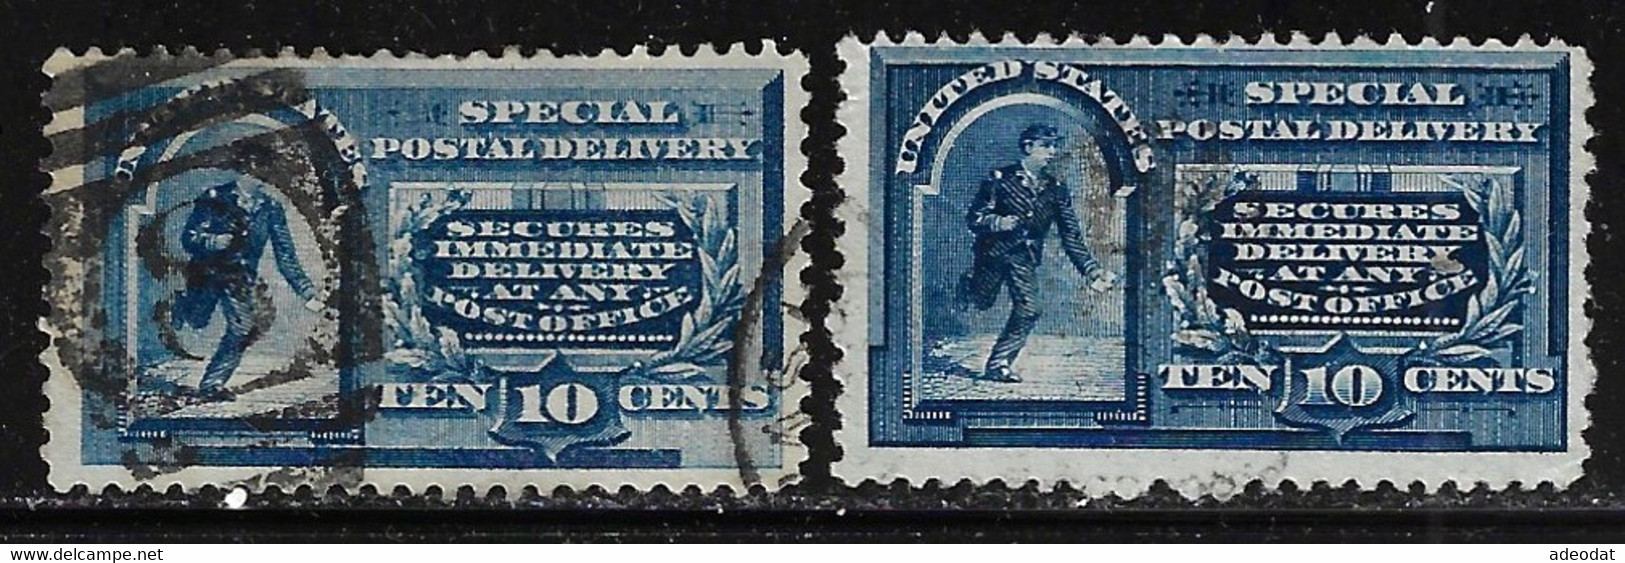 UNITED STATES 1885 SPECIAL DELIVERY SCOTT E1,E4 USED CV US$125. - Express & Einschreiben